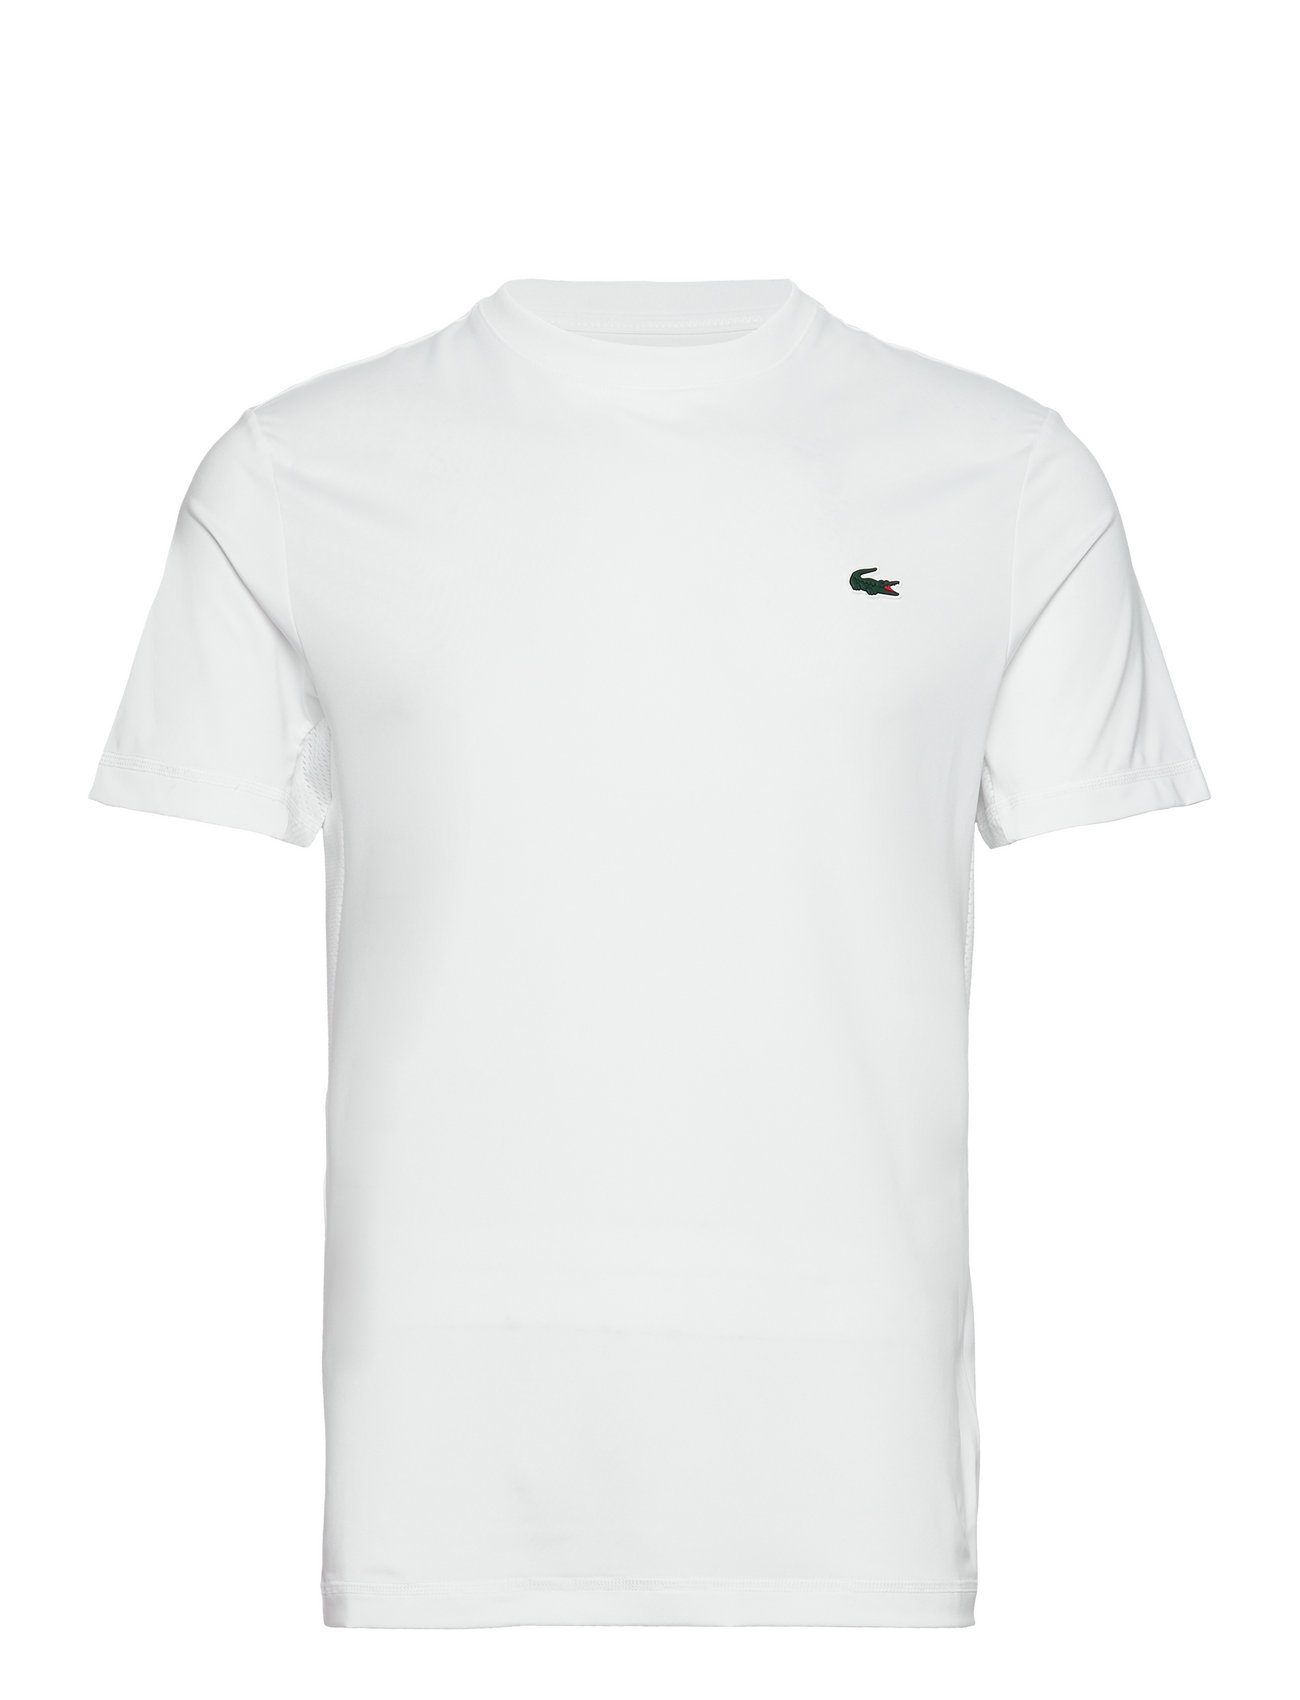 Tee-Shirt&Turtle Neck Sport T-shirts Short-sleeved White Lacoste